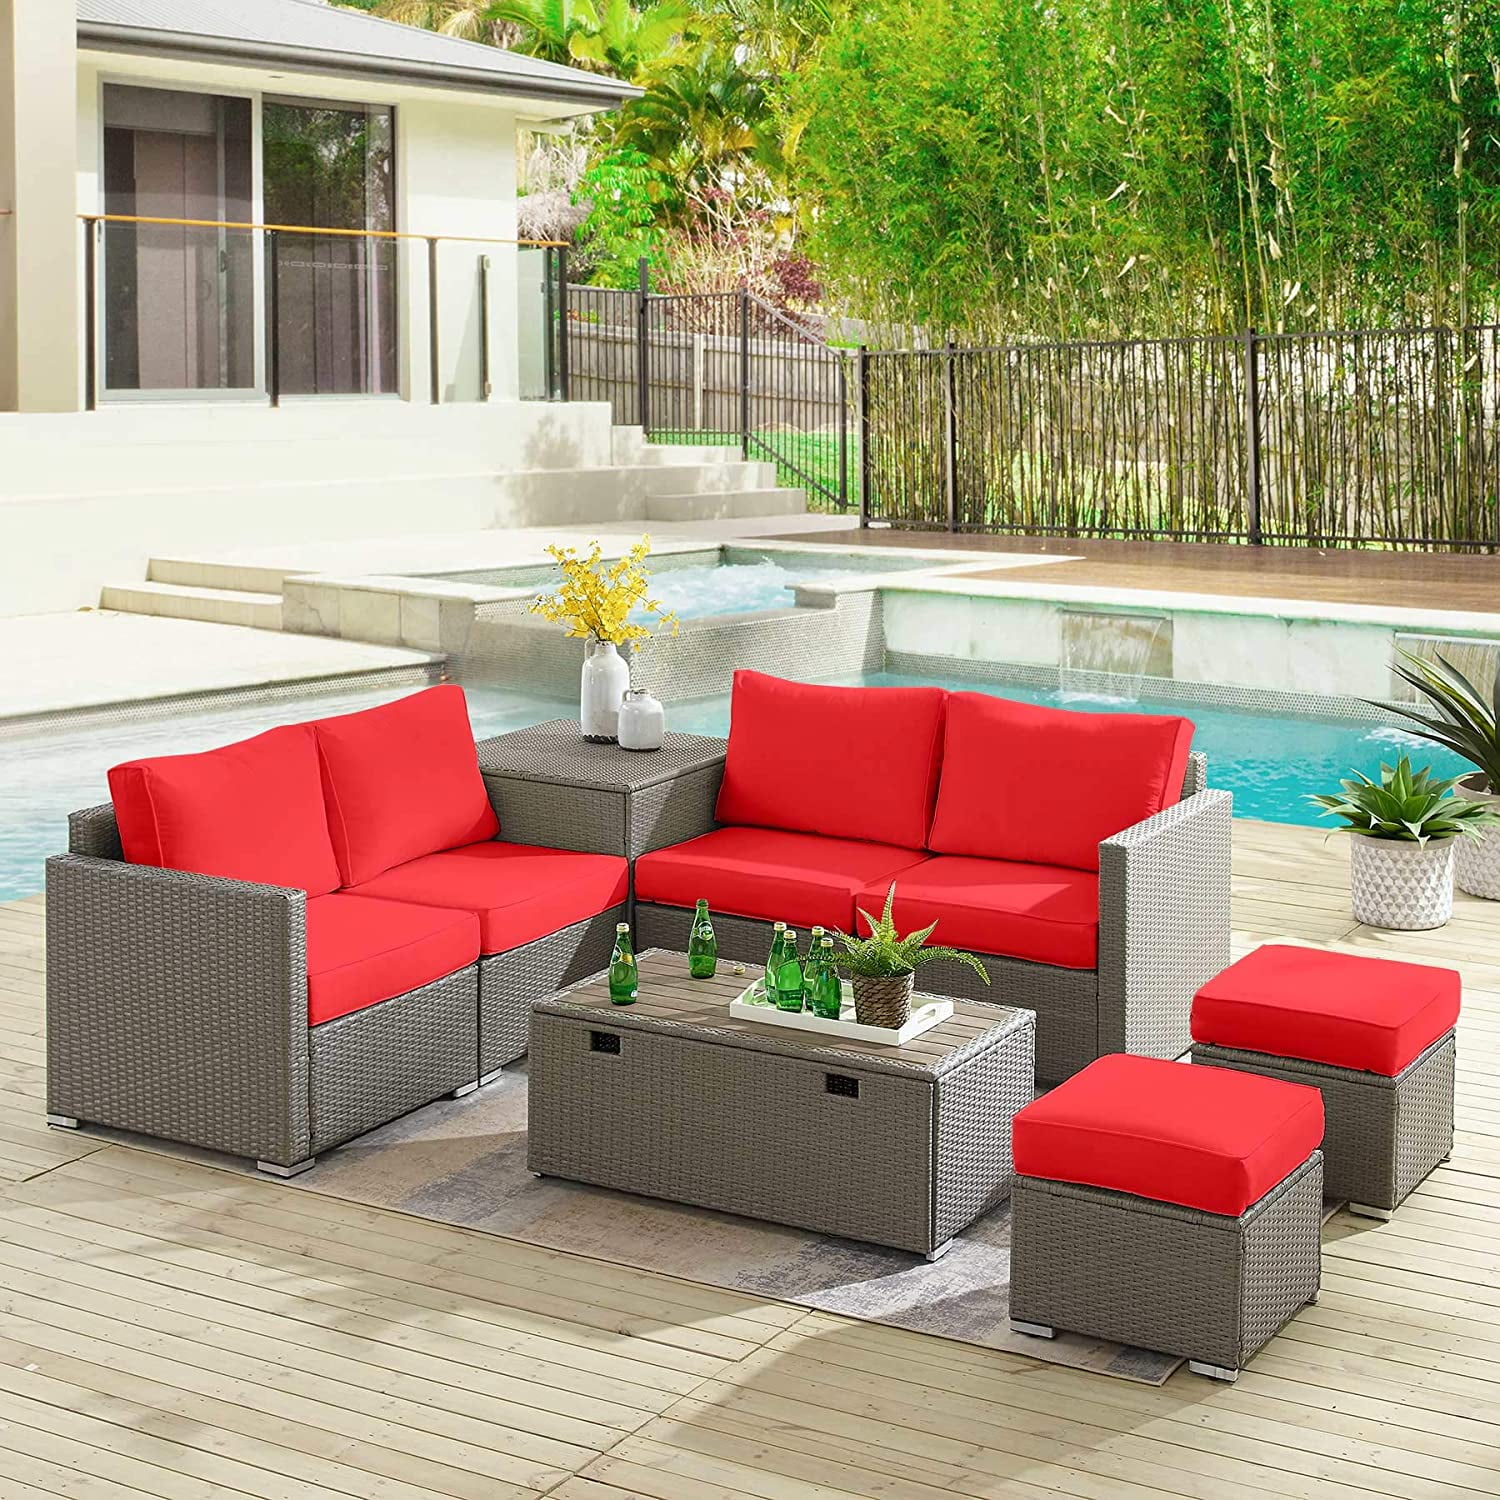 Tribesigns 8 Pieces Patio Furniture Set with 2 Storage